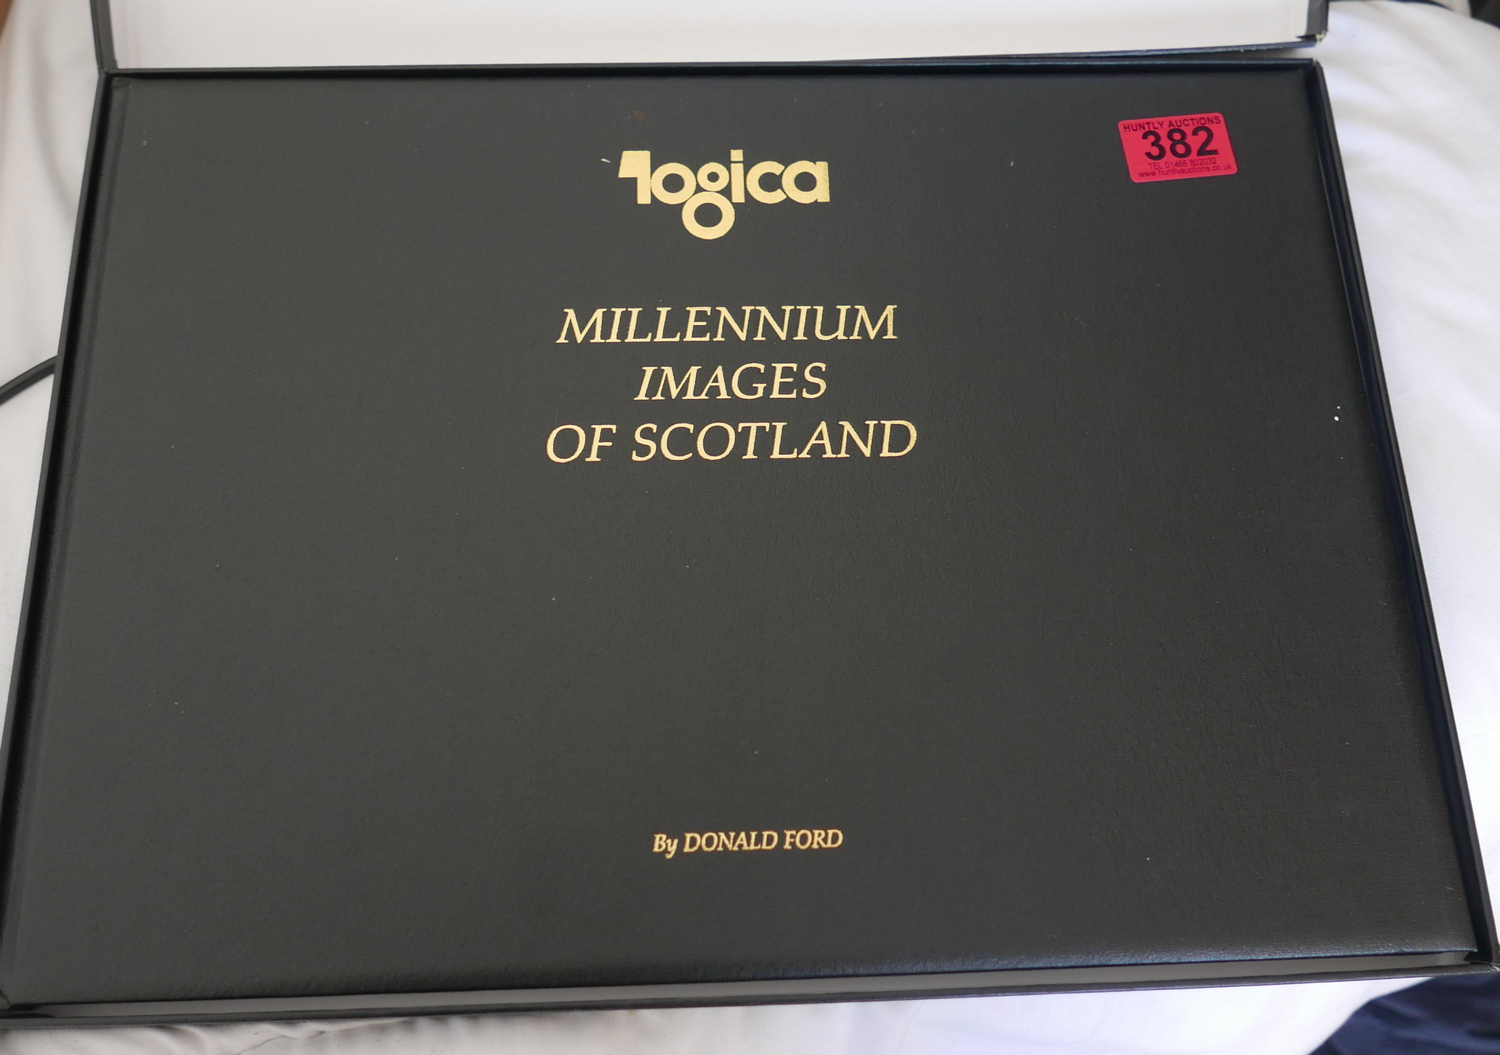 Logica Millenium Images of Scotland Book by Donald Ford - 17" x 12"